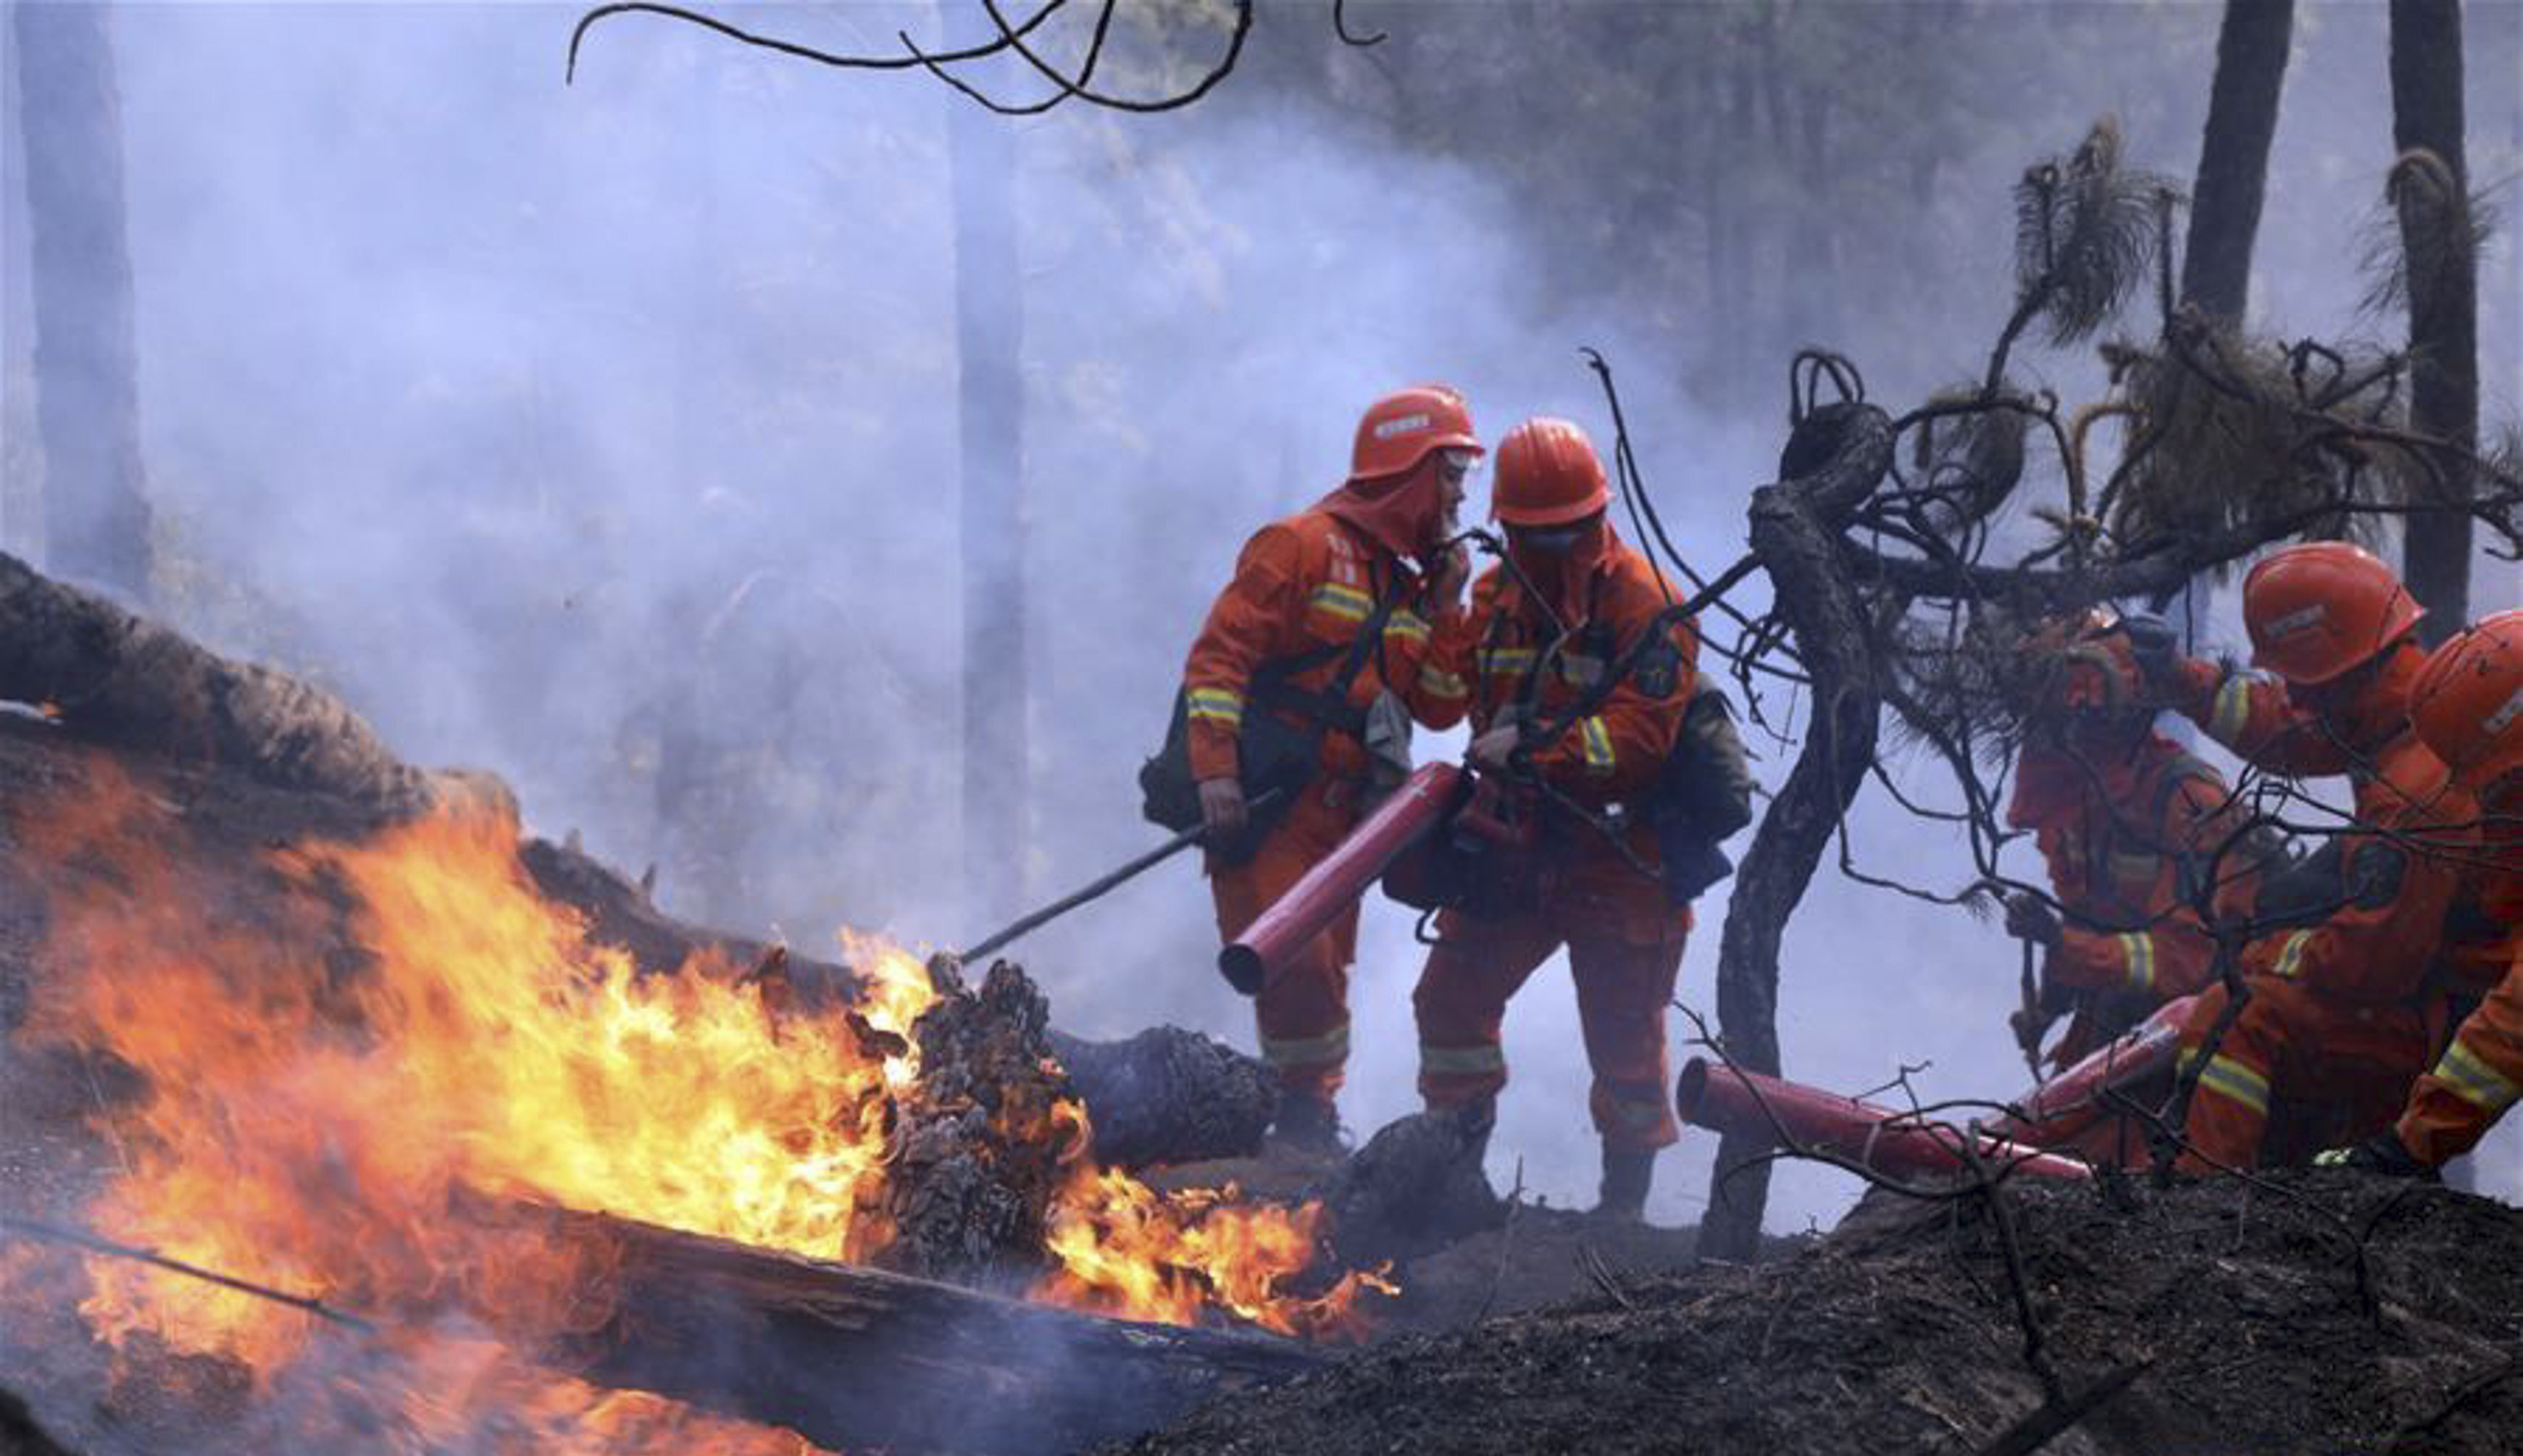 Fire fighters put out a forest fire in Liangshan prefecture, Sichuan province in China on March 31, 2020. Photo: Xinhua